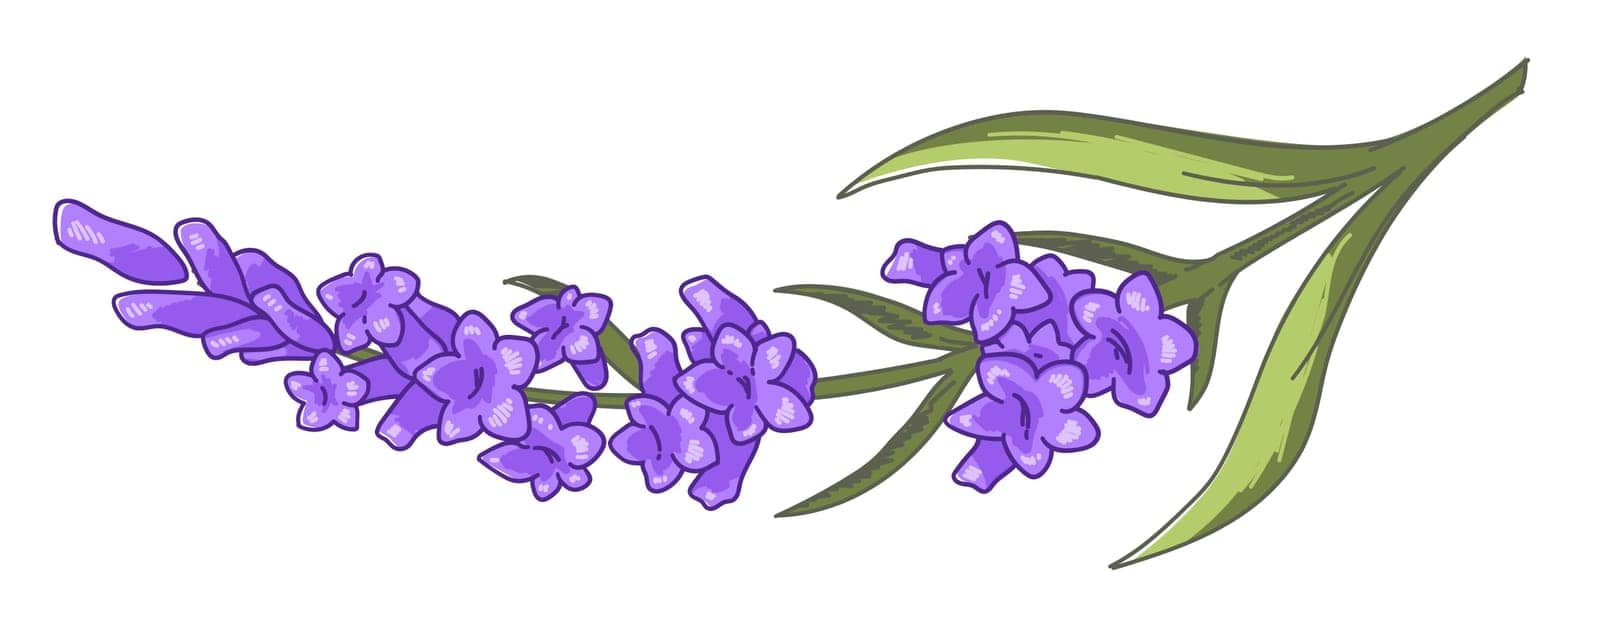 Flower in blossom, purple lavender branch with leaves and blooming. Isolated twig, decorative bouquet with foliage. Seasonal plant, summer or spring, romantic present gift. Vector in flat style